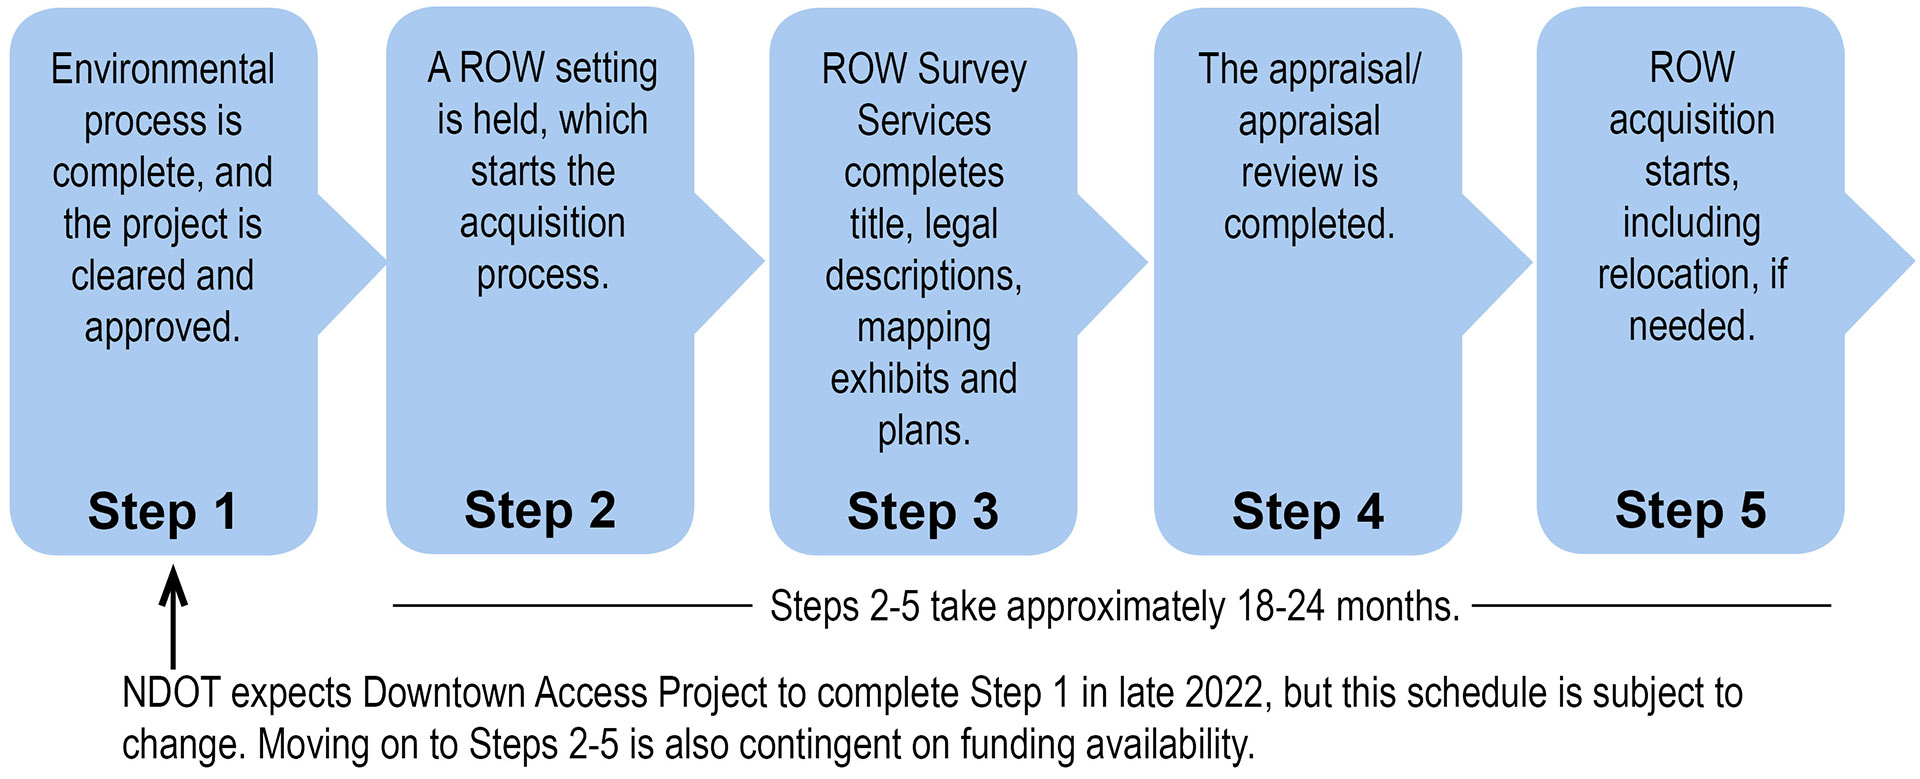 Right of Way acquisition process